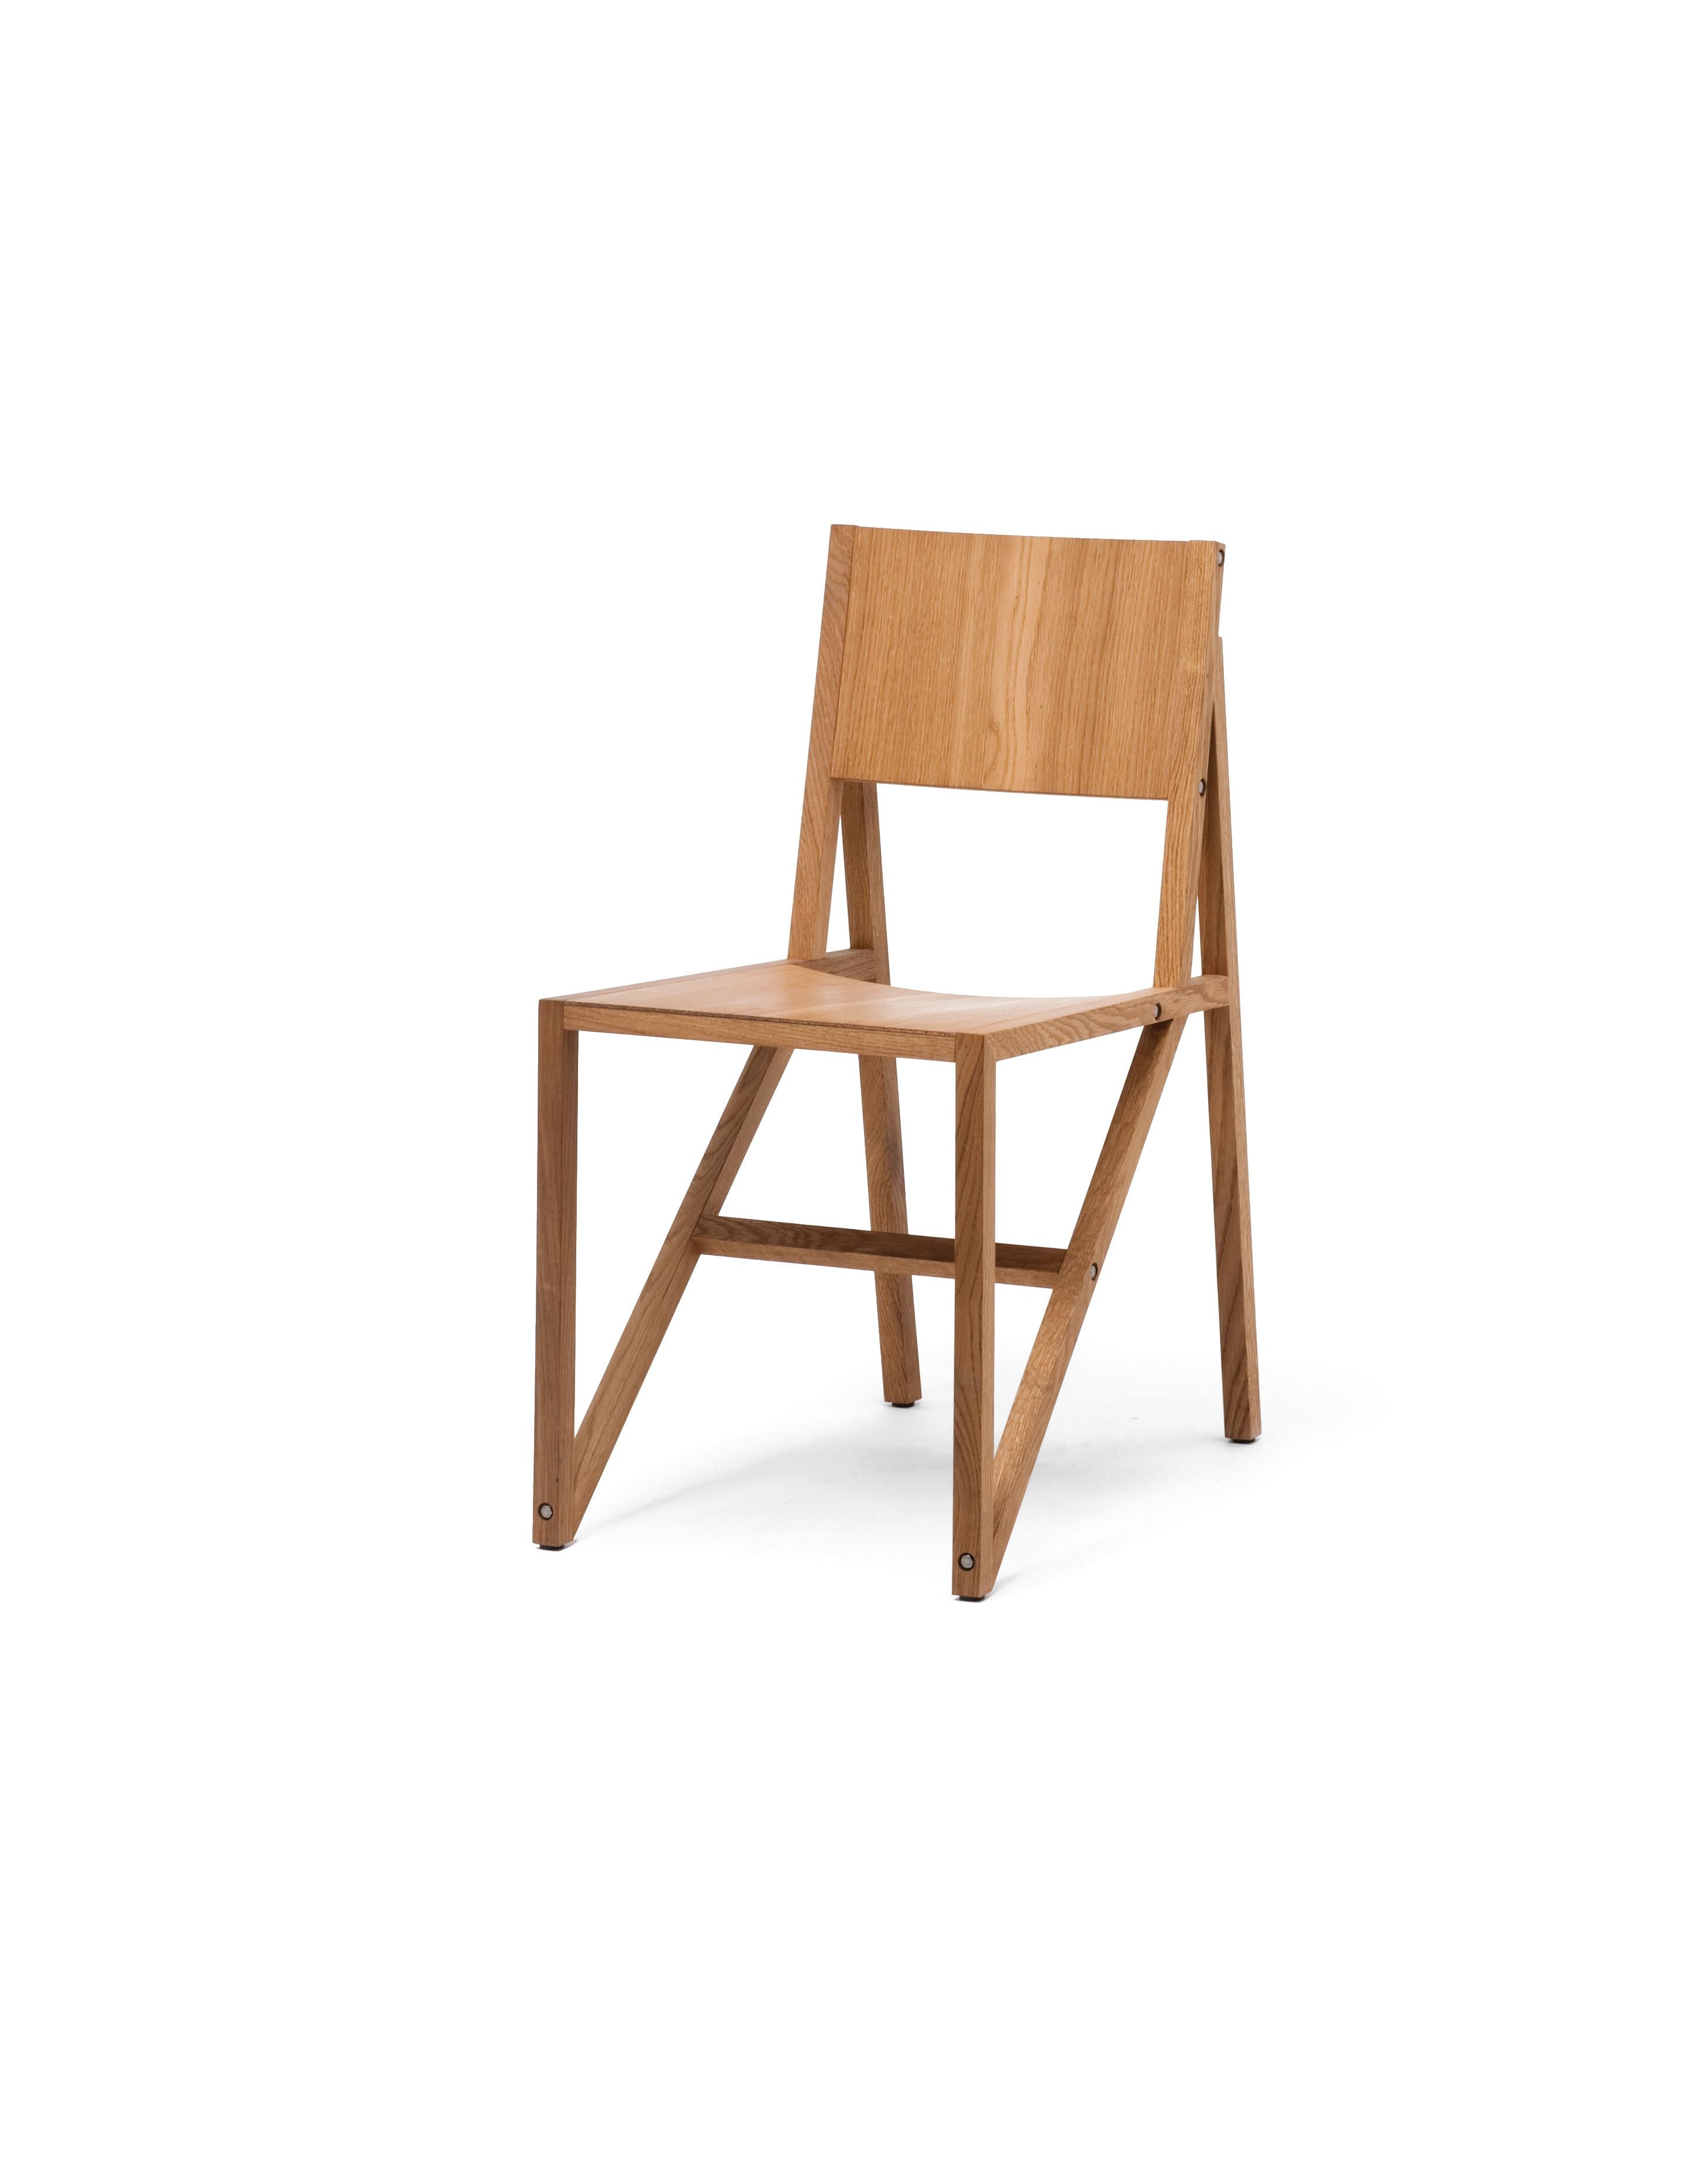 This tough lightweight chair is blessed with good proportions and seating comfort. A complex study in angles the straight lines of the wooden laths are adeptly balanced with the subtly curved seating and support surfaces. The frame chair is full of